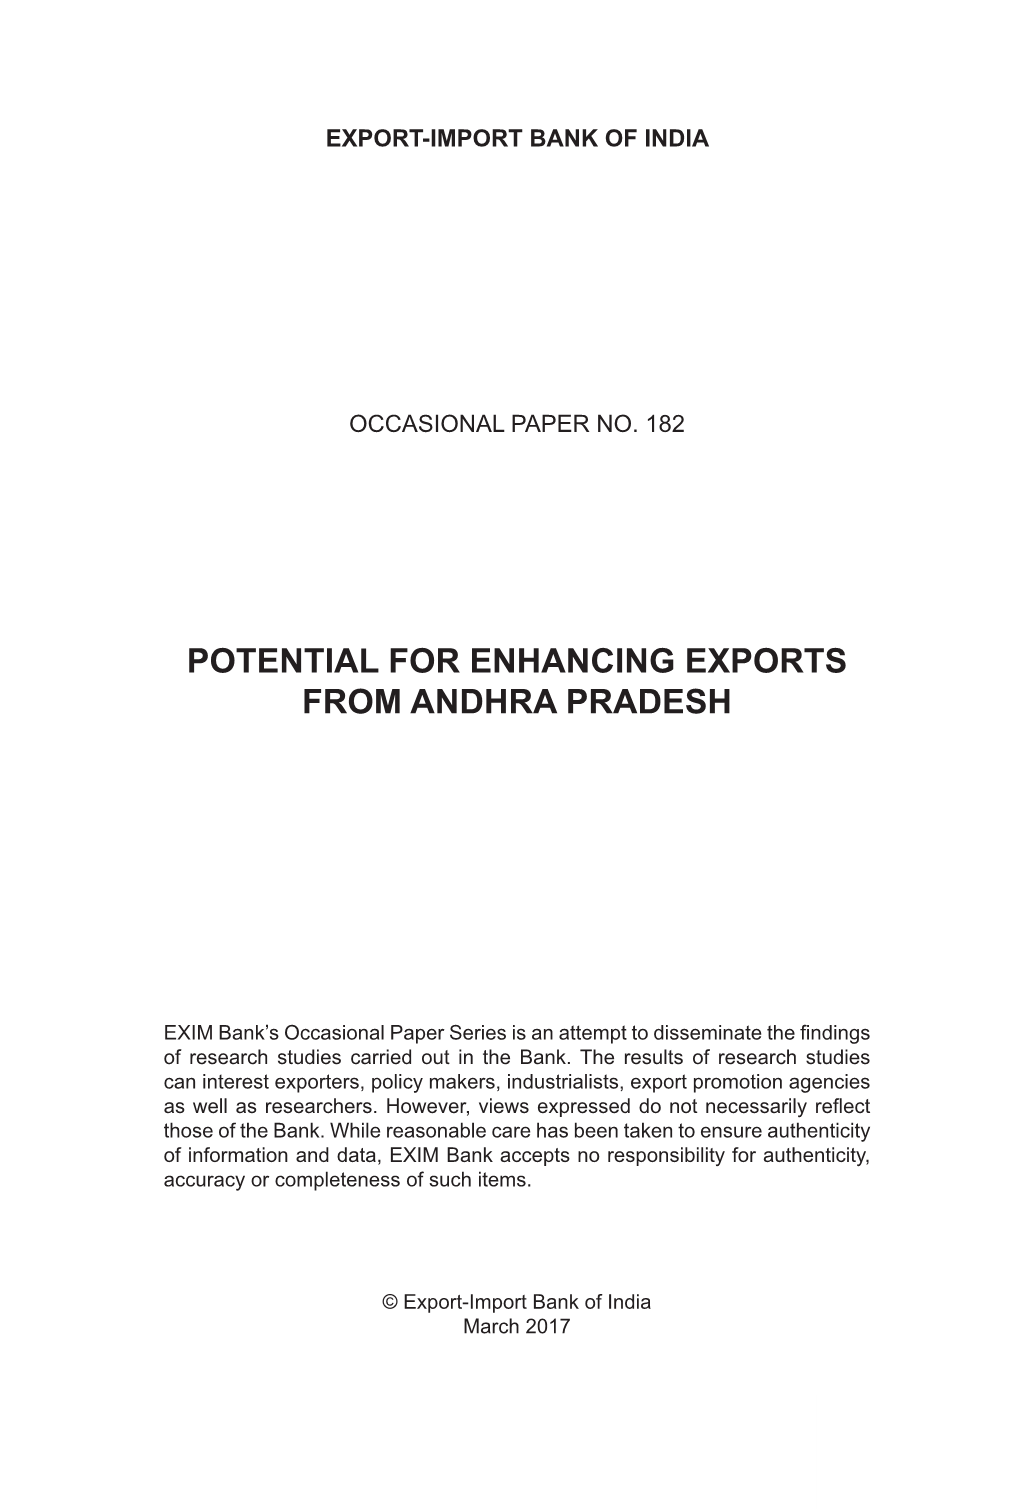 Potential for Enhancing Exports from Andhra Pradesh